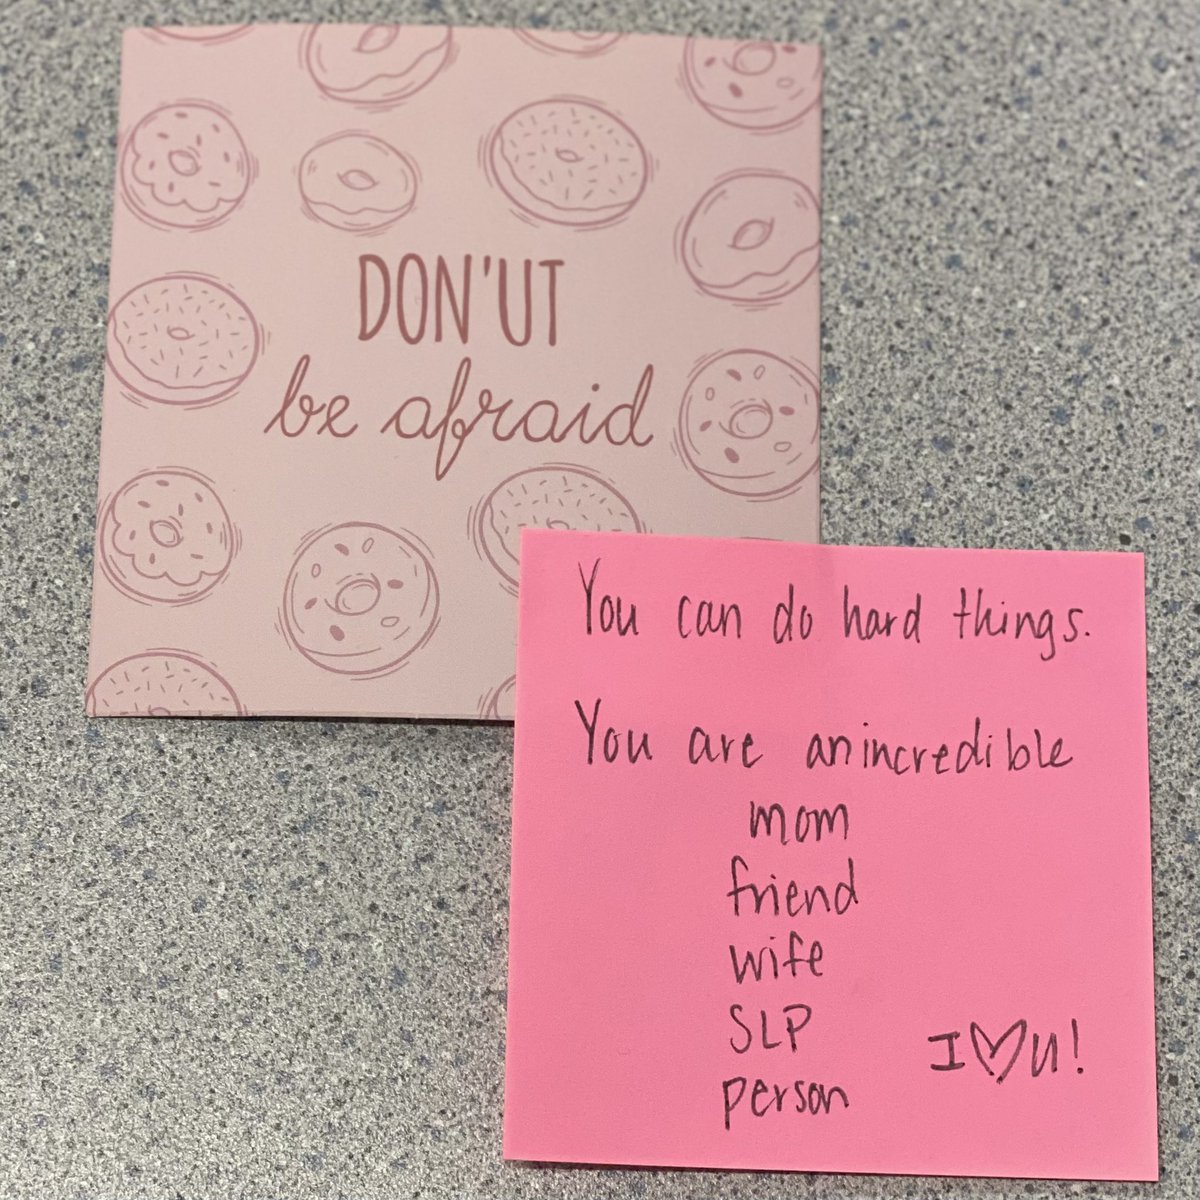 One of my work wives/besties left this on my desk and it’s EXACTLY what I needed today. #WorkWife #KindWords #HardThings